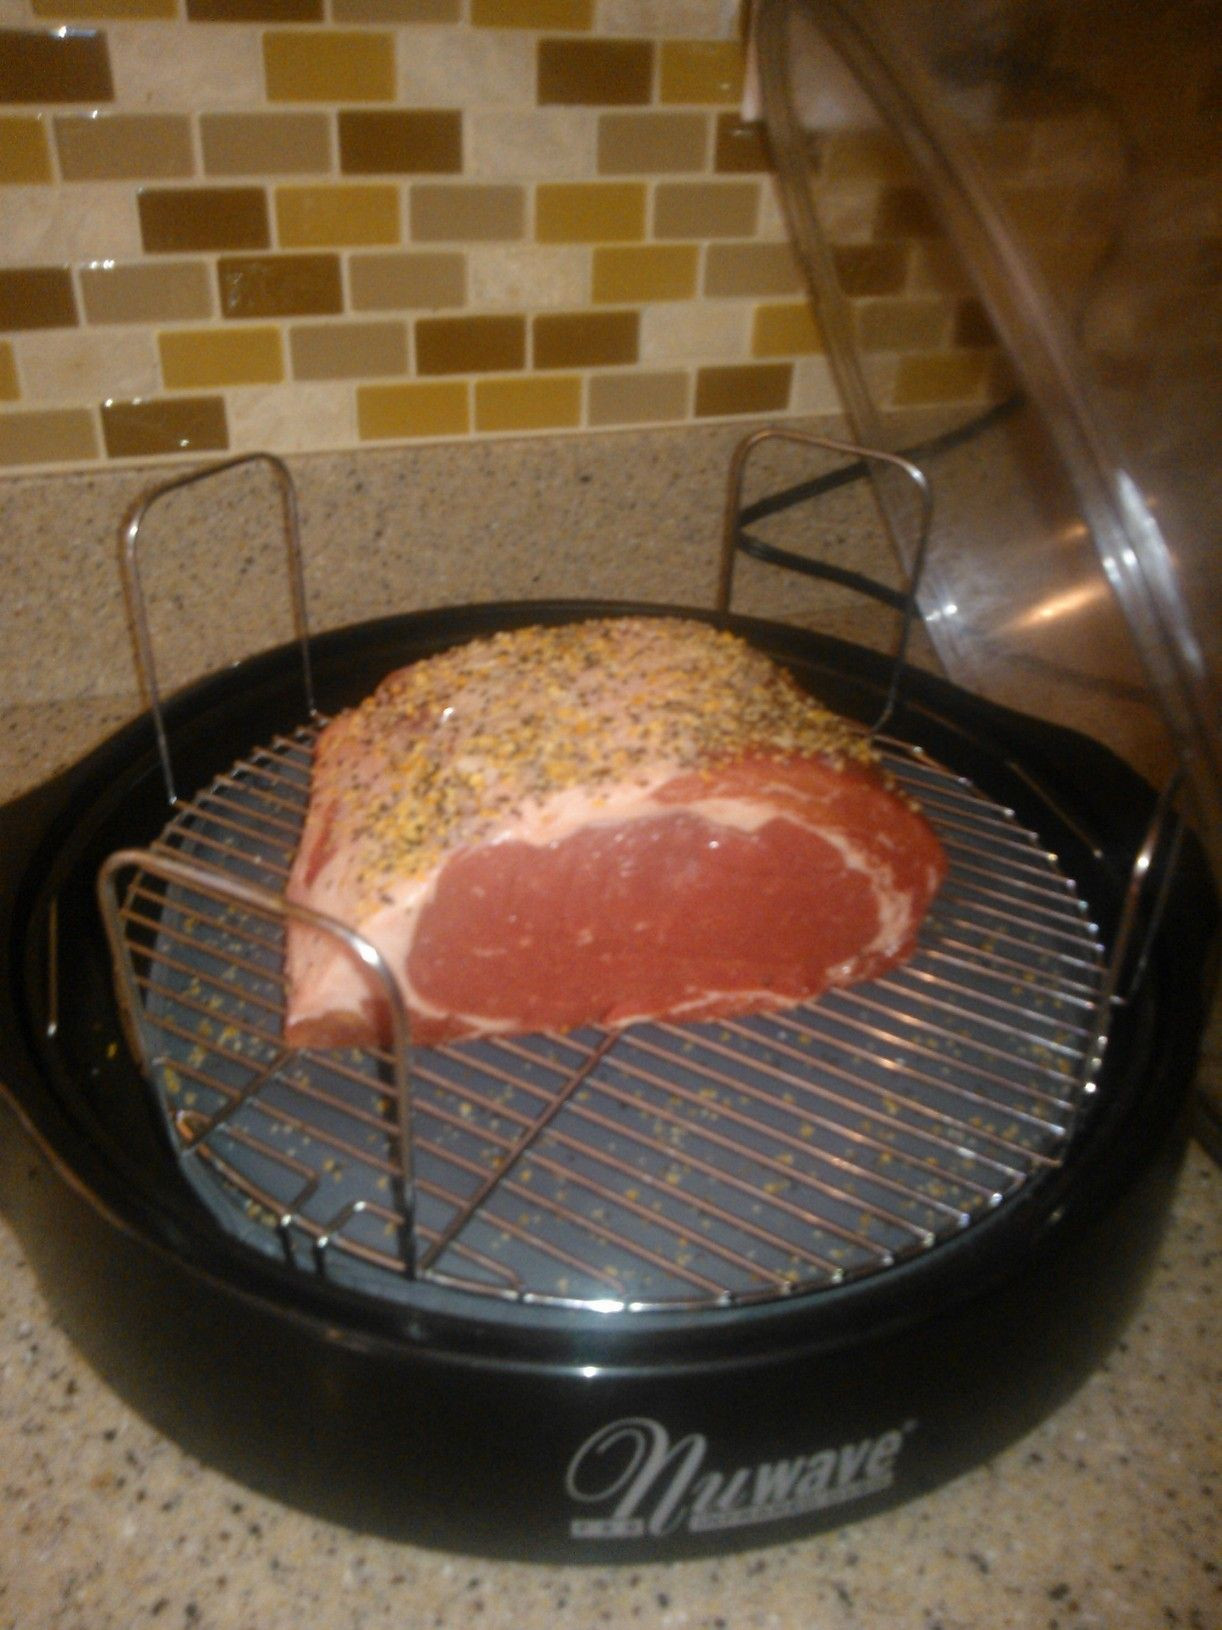 Nuwave Air Fryer Prime Rib
 Look at this beautiful prime rib prepared by our very own